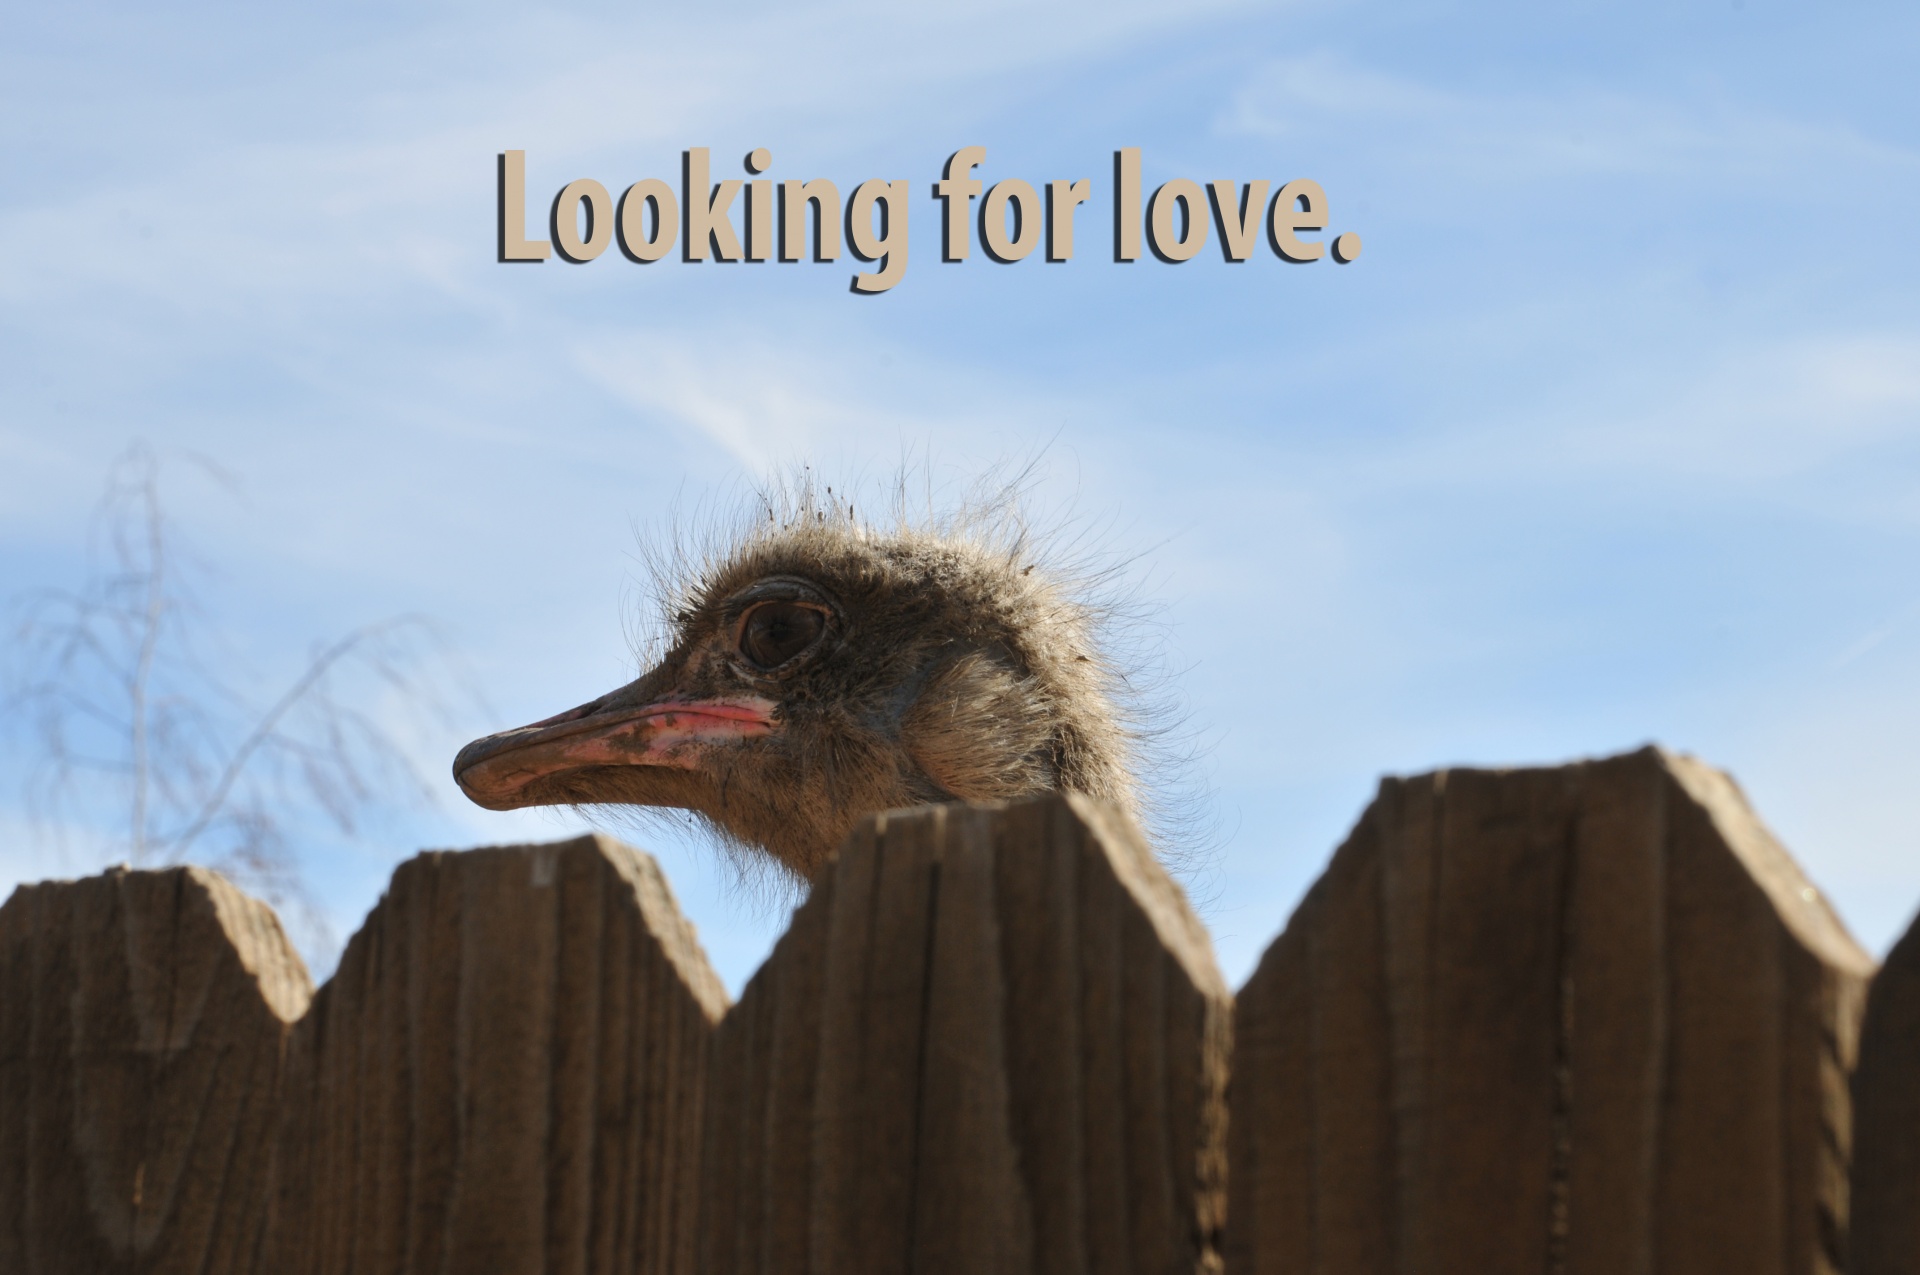 Funny Looking For Love Image